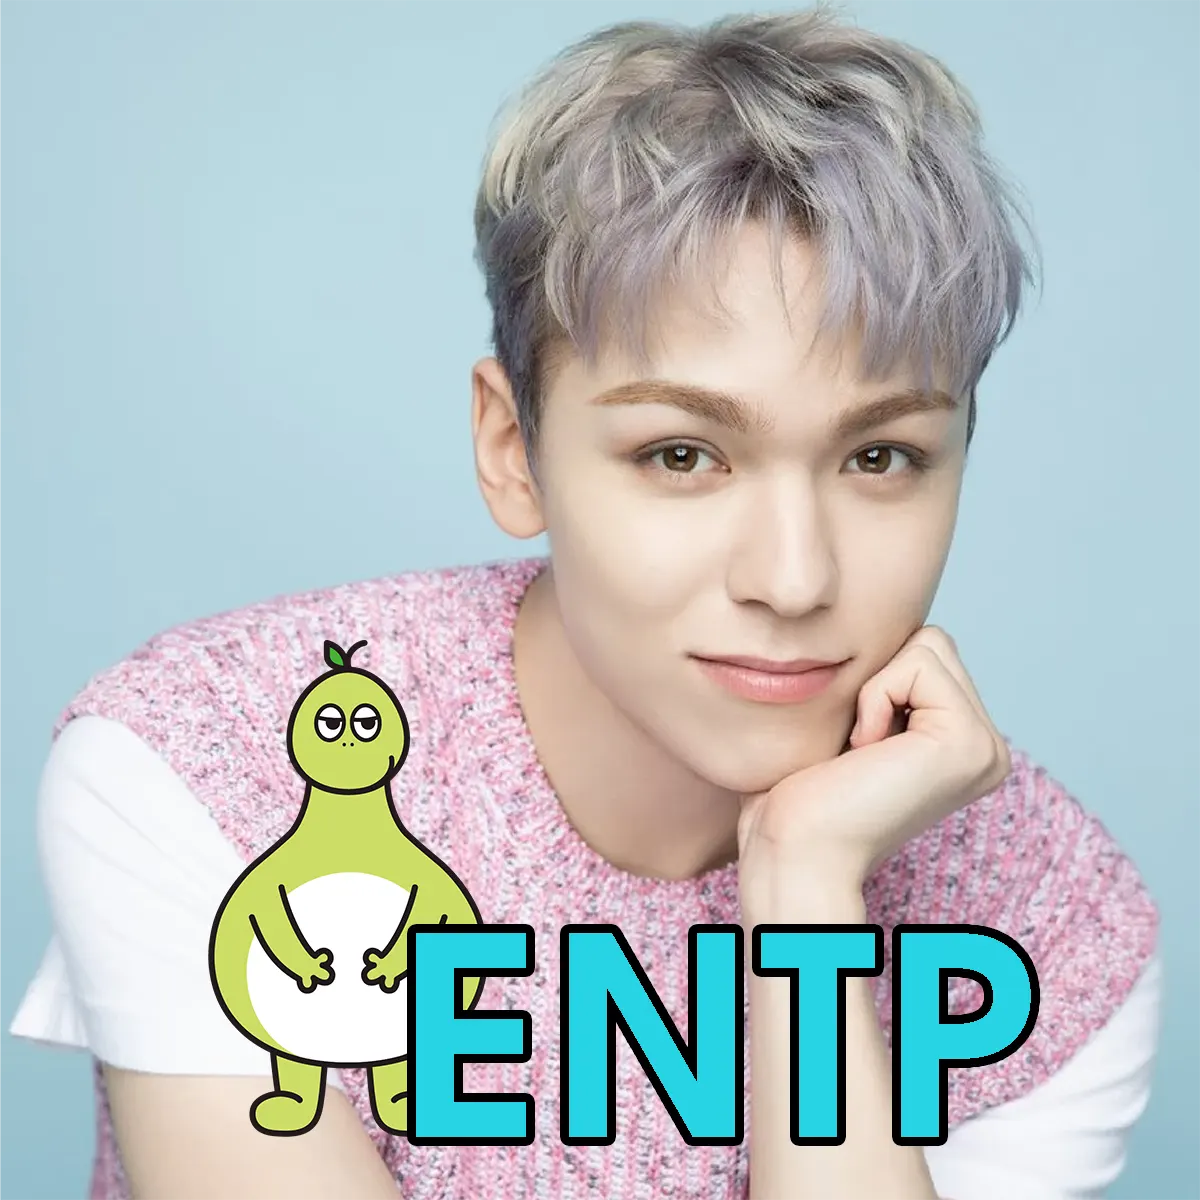 Vernon SEVENTEEN MBTI Personality Test ENFP ENTP Personality Type